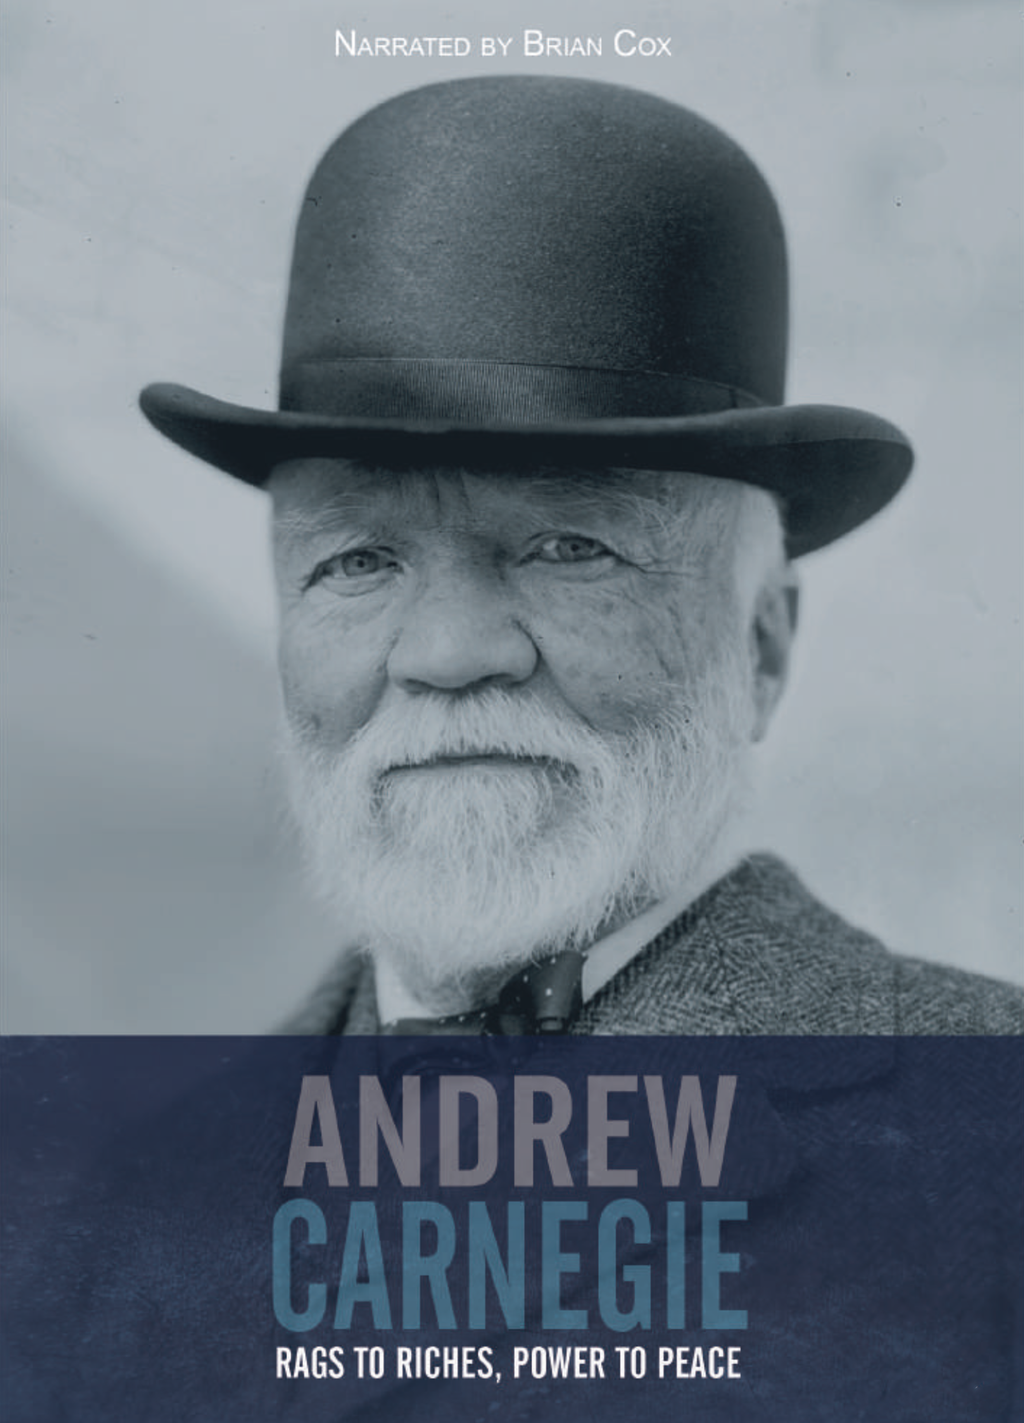 Andrew Carnegie - Rags to Riches, Power to Peace